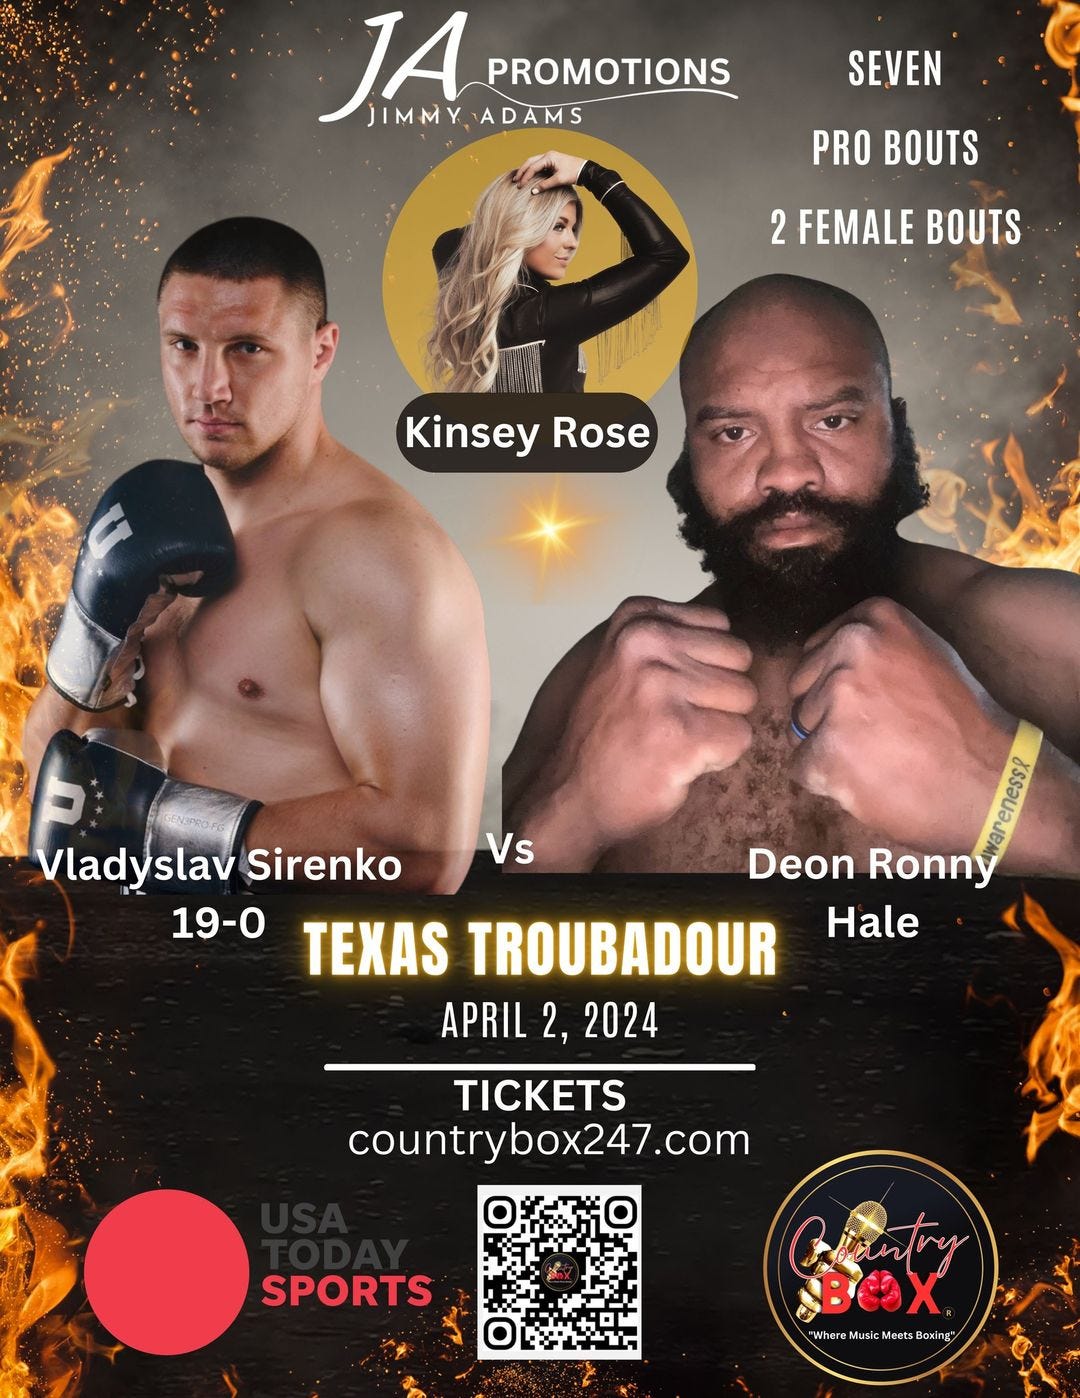 May be an image of 3 people and text that says 'JA JIMMY ADAMS PROMOTIONS SEVEN PRO BOUTS FEMALE BOUTS Kinsey Rose Vs Vlady slav Sirenko Deon Ronny 19-0 TEXAS TROUBADOUR Hale APRIL 2, 2024 TICKETS country box247. .com SPORTS in BeX ""'